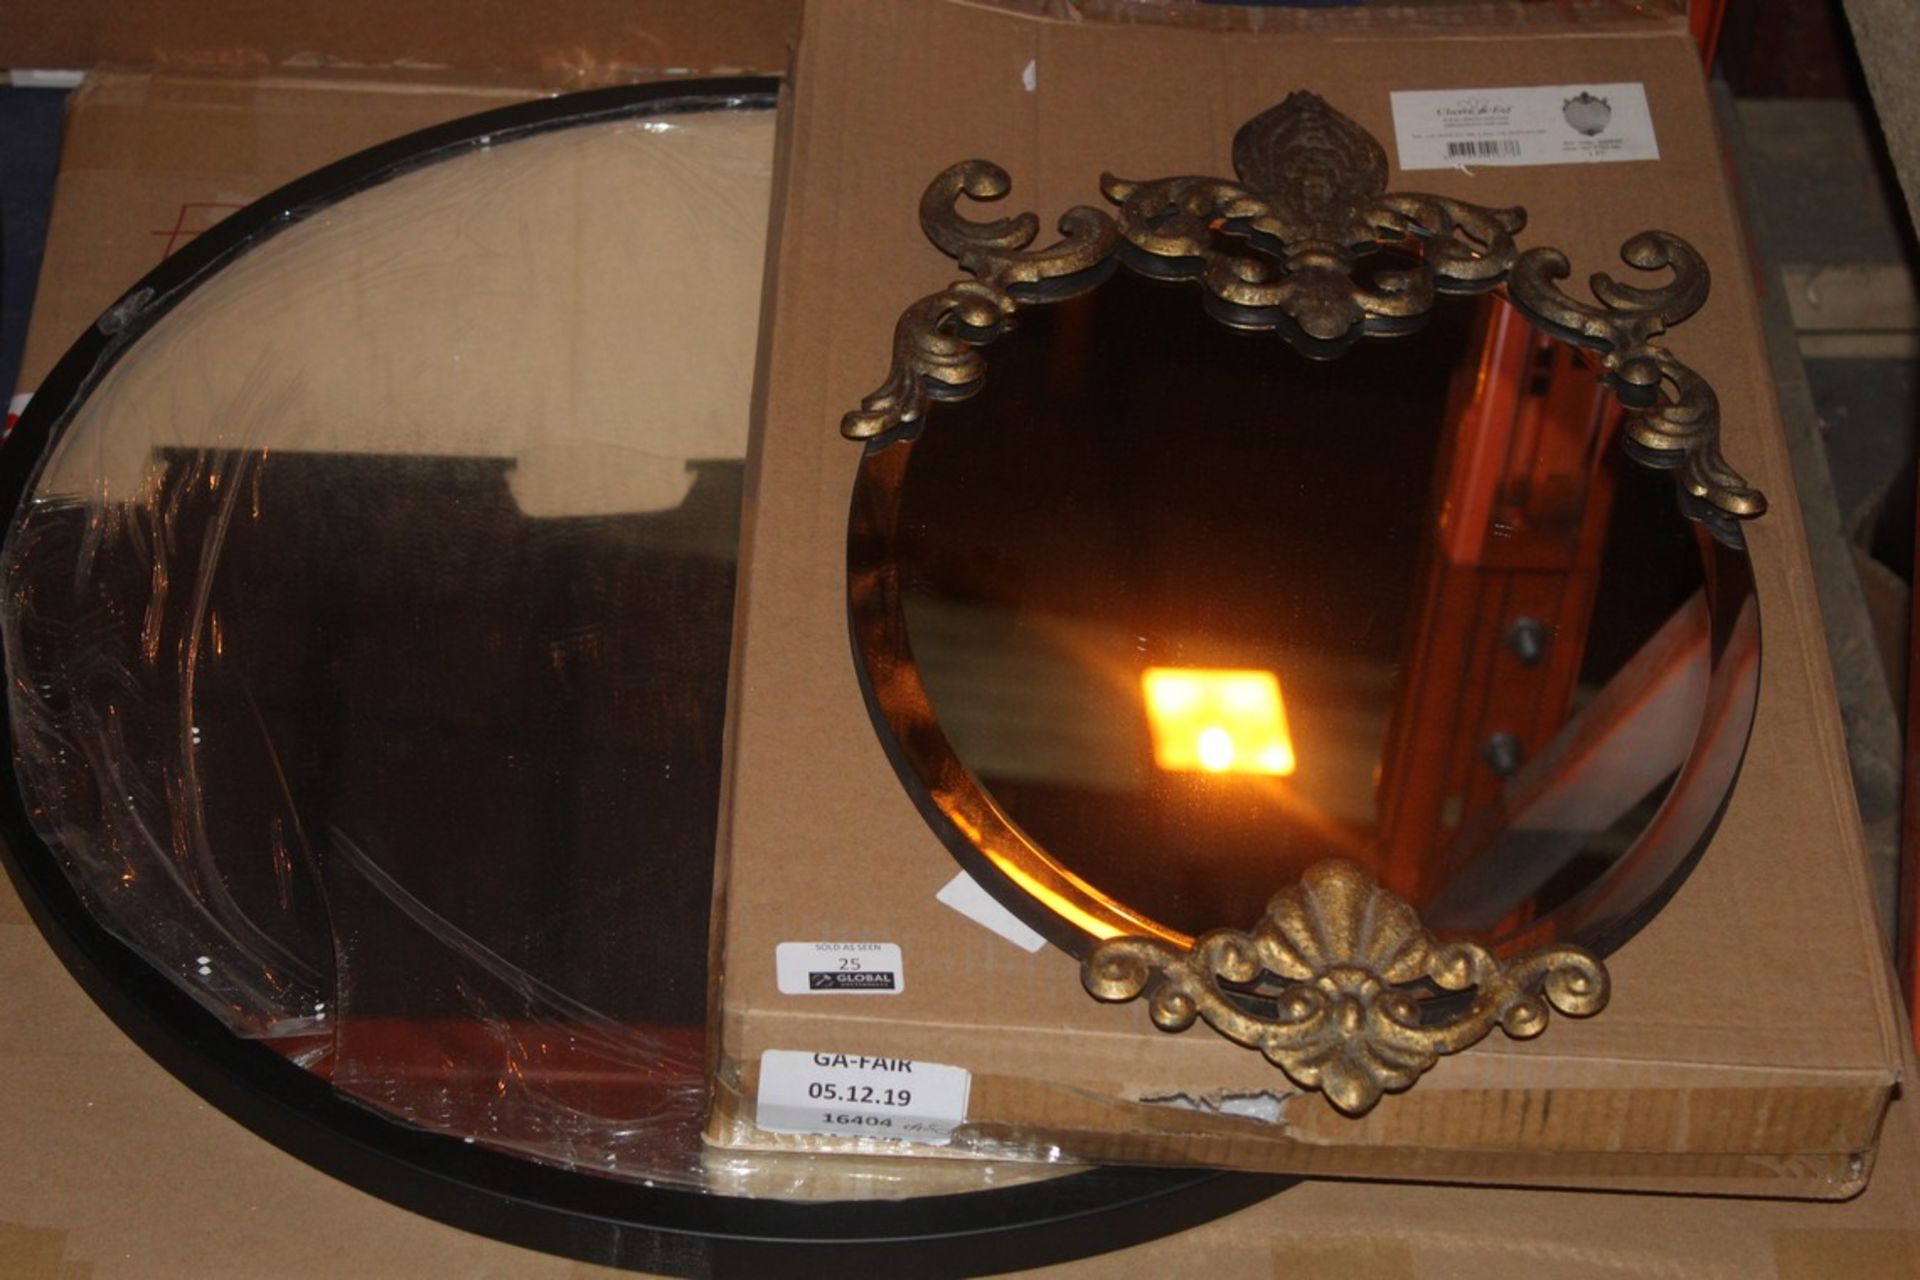 Lot to Contain 2 Assorted Claire and Eth Mirrors and Round Wall Hanging Decorative Mirrors